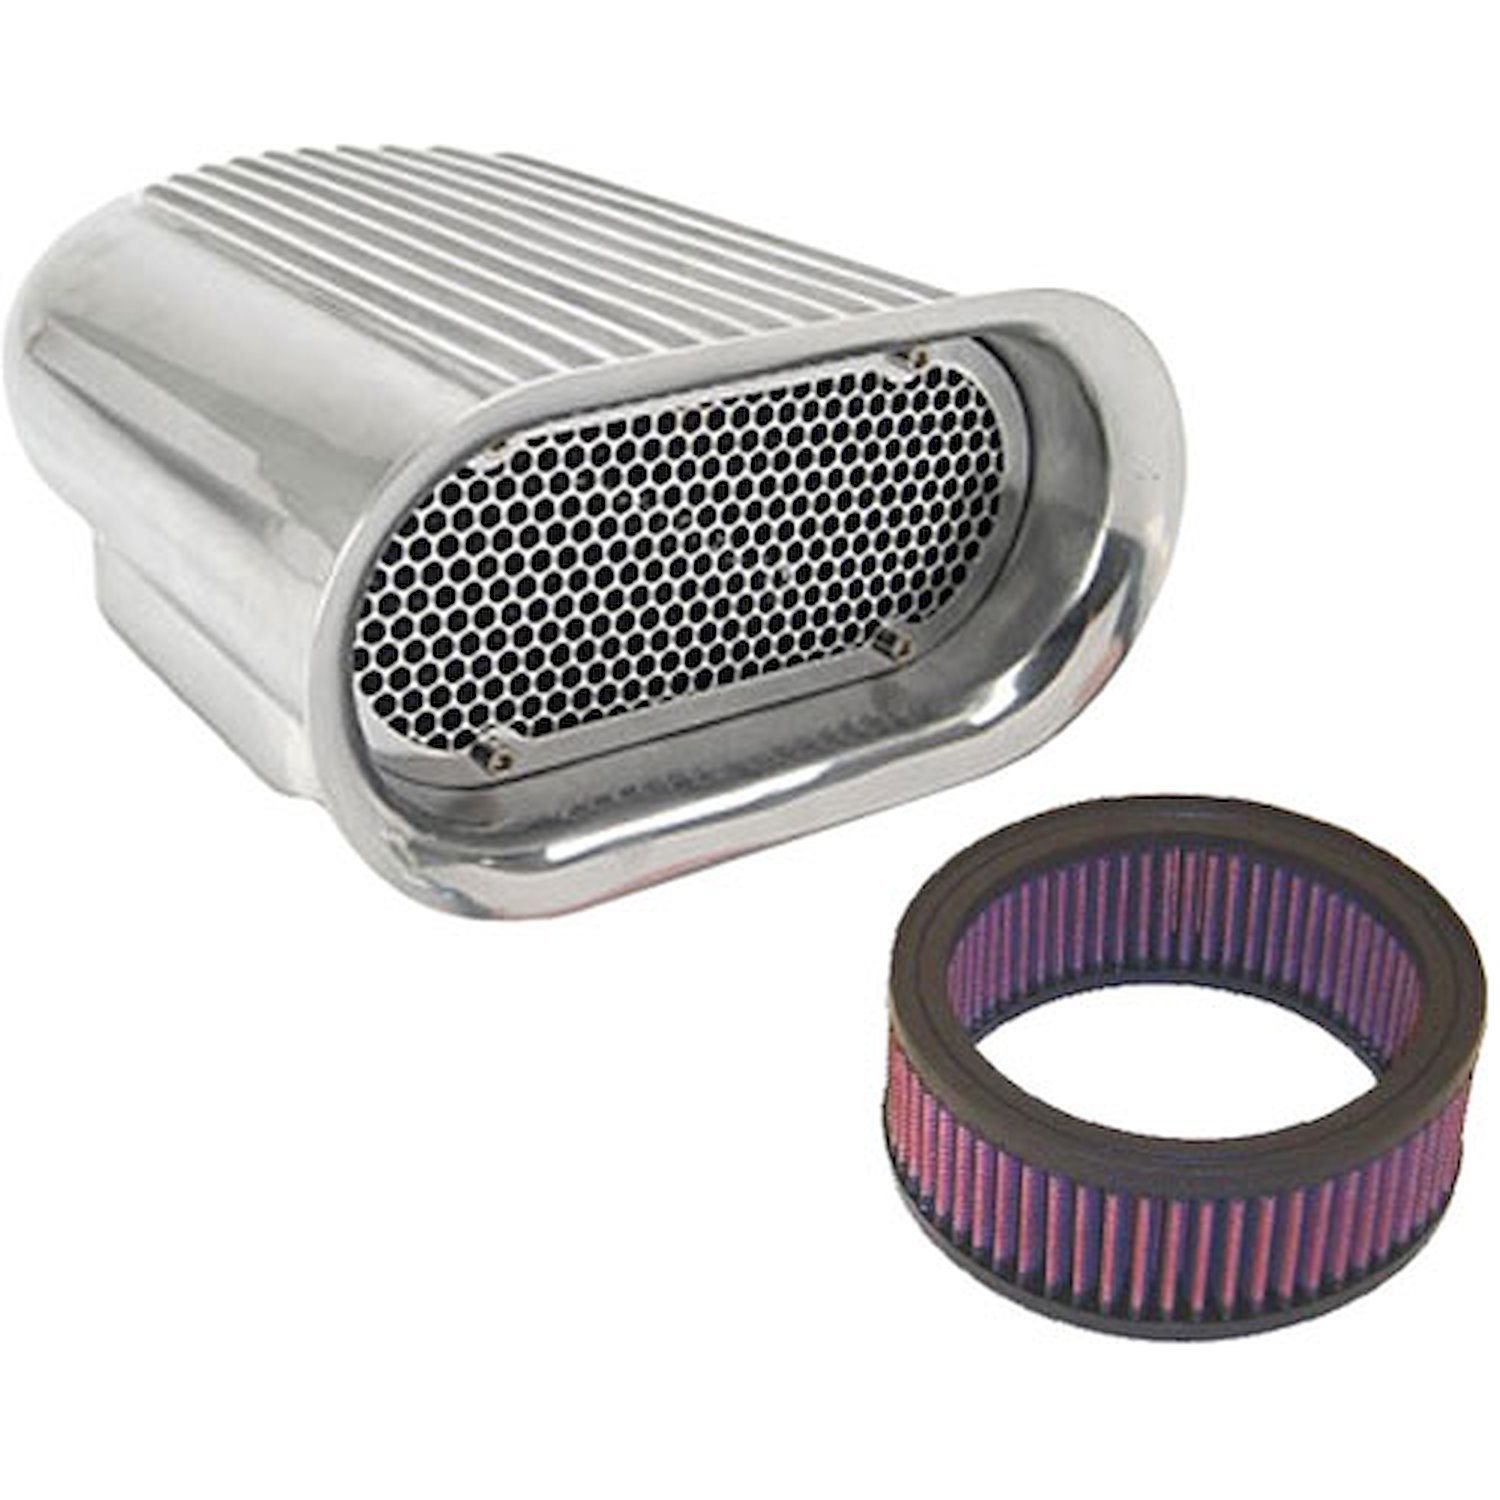 Hilborn-Style Scoop Kit with Filter